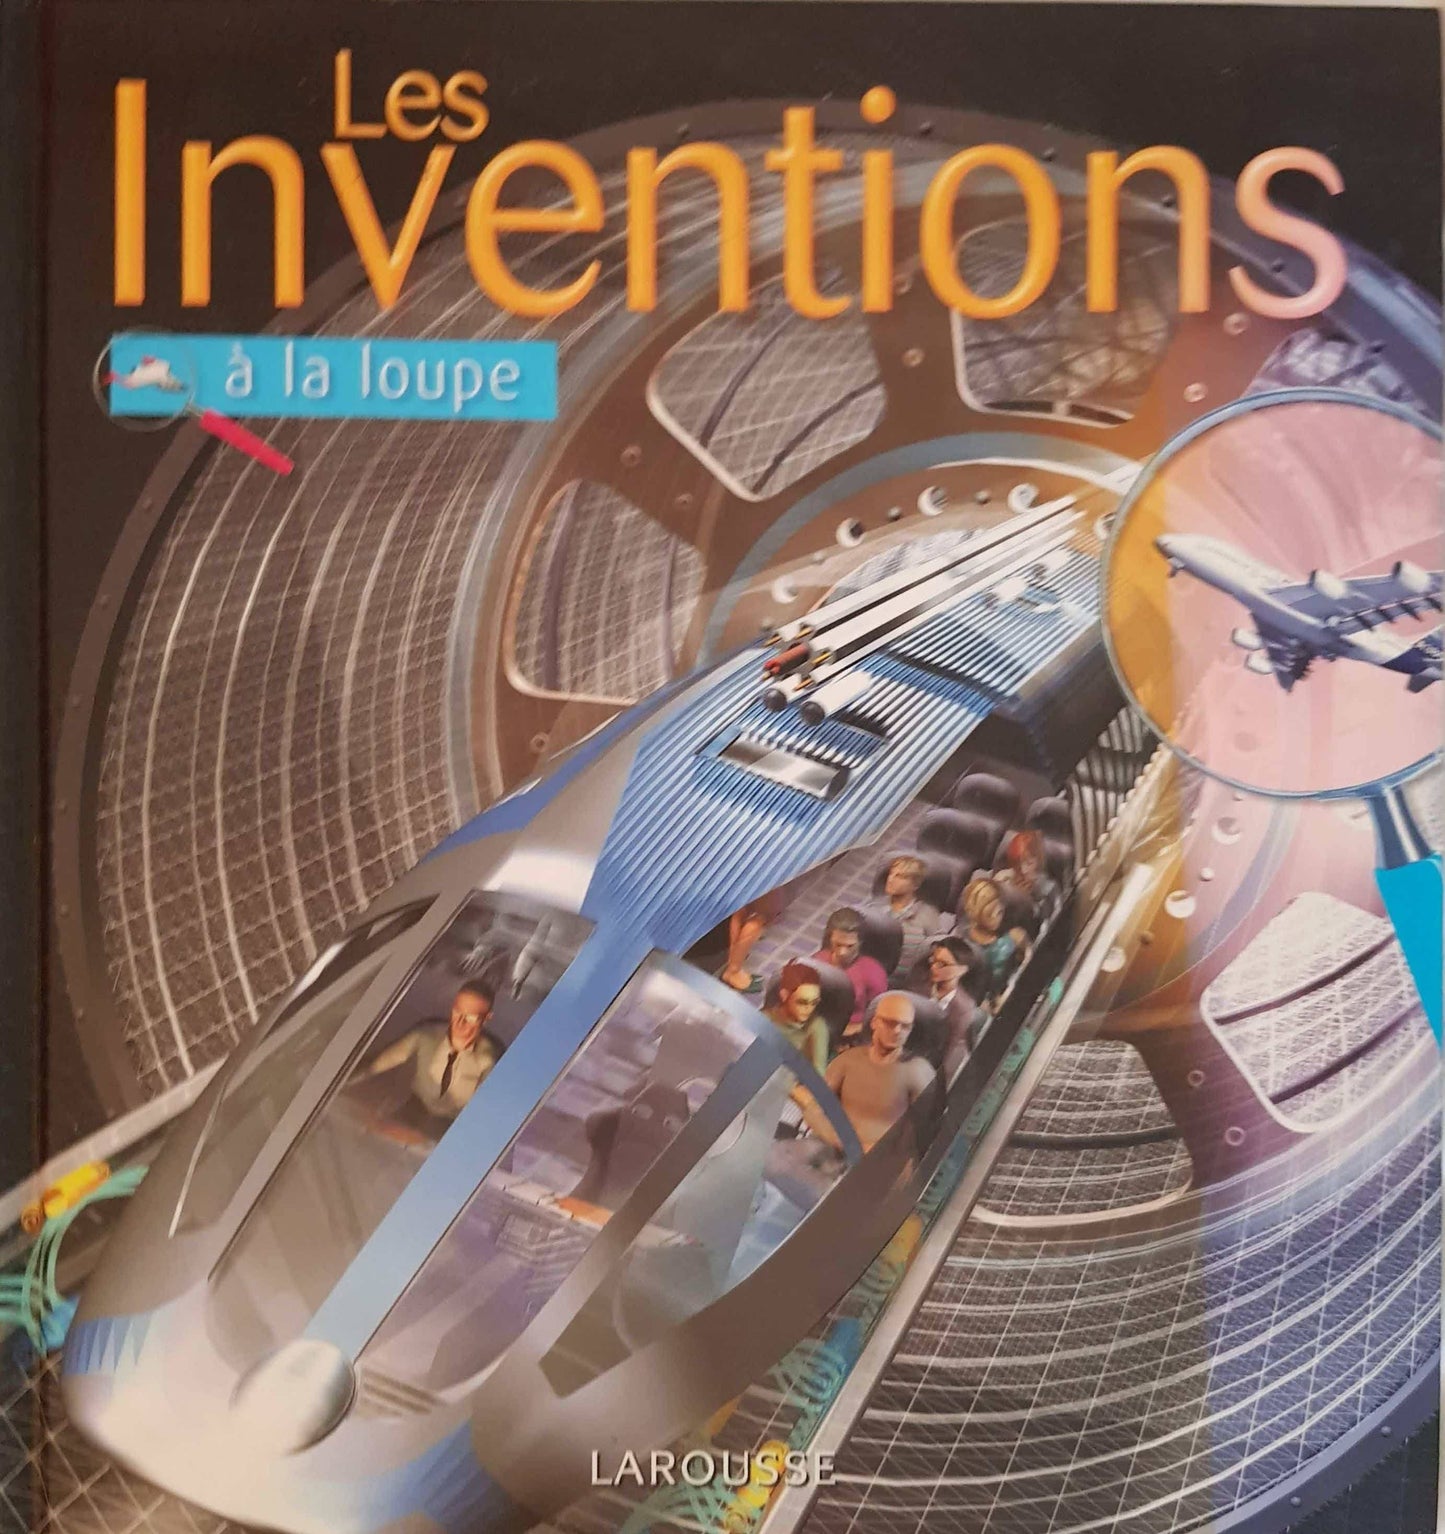 Les Inventions Like New Not Appicable  (4619395006519)